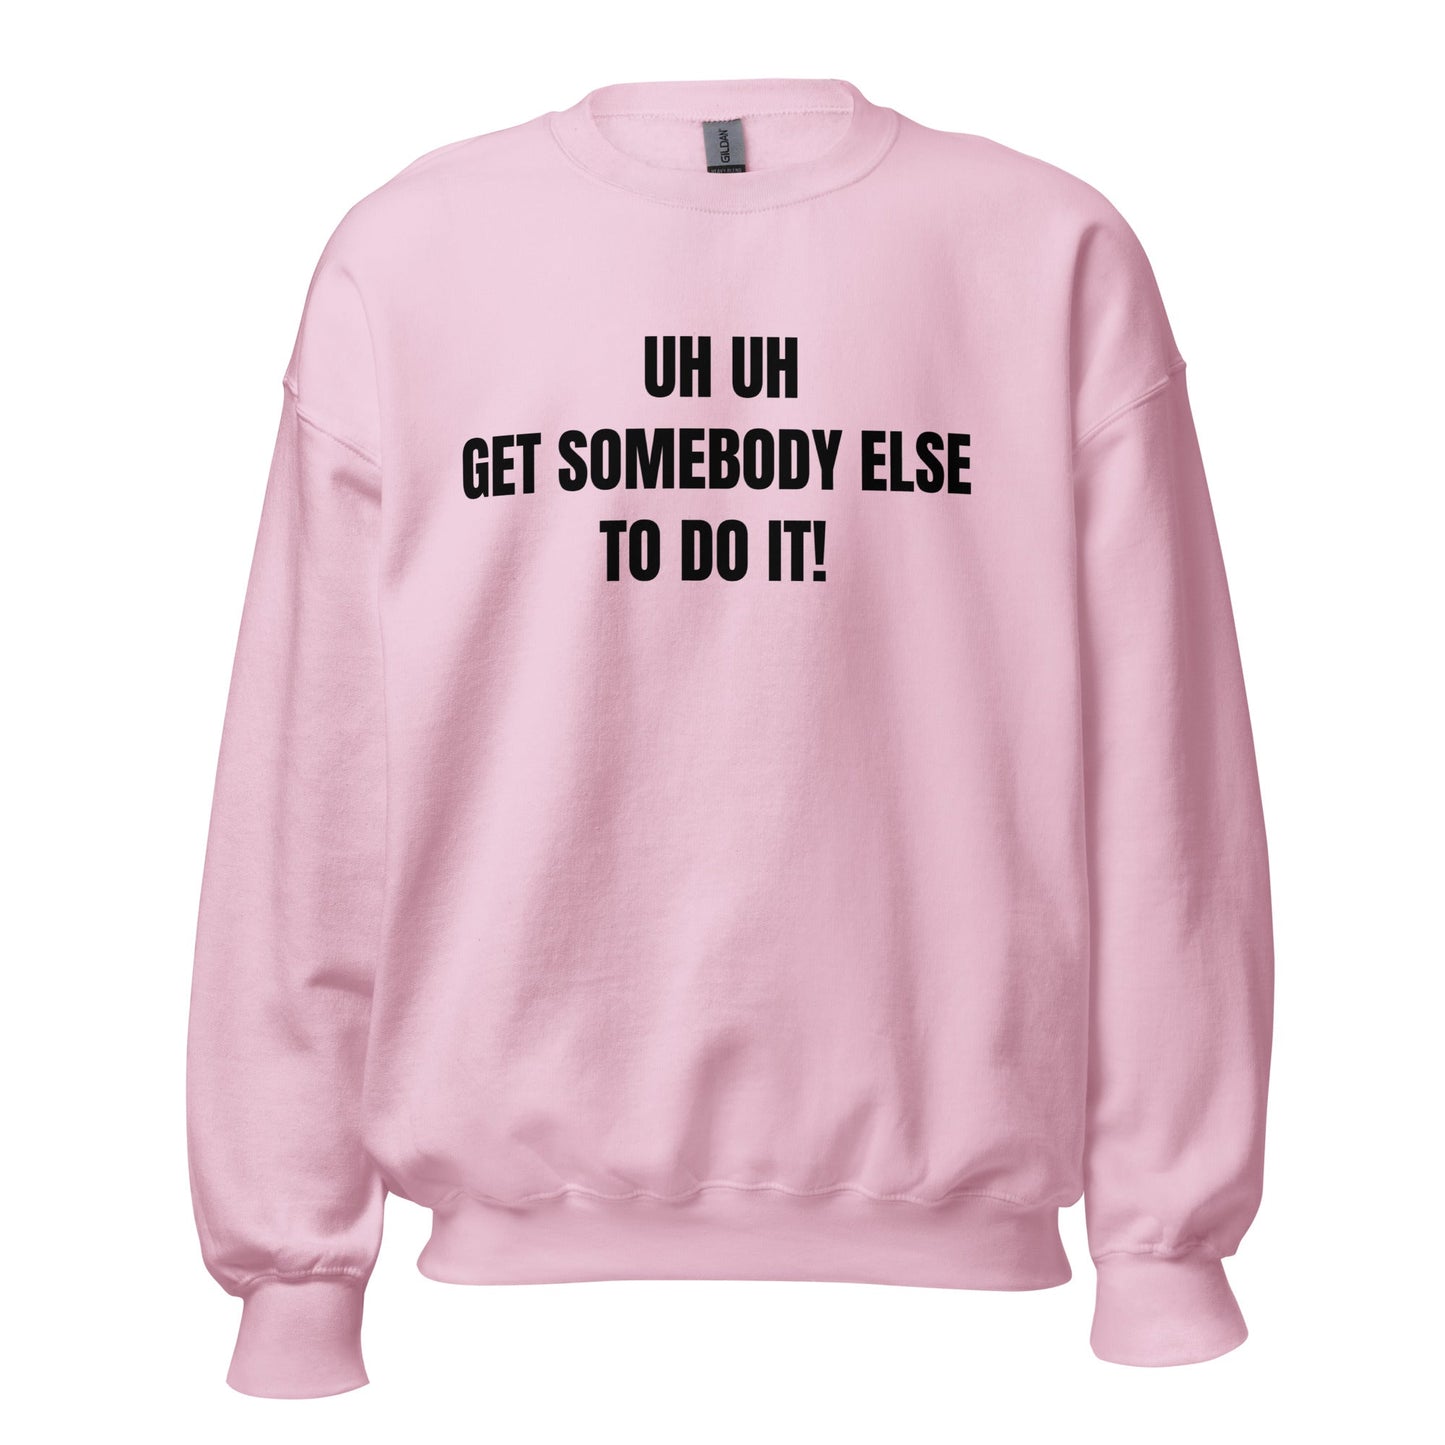 Uh Uh Get Somebody Else To Do It! Unisex Sweatshirt - Catch This Tea Shirts